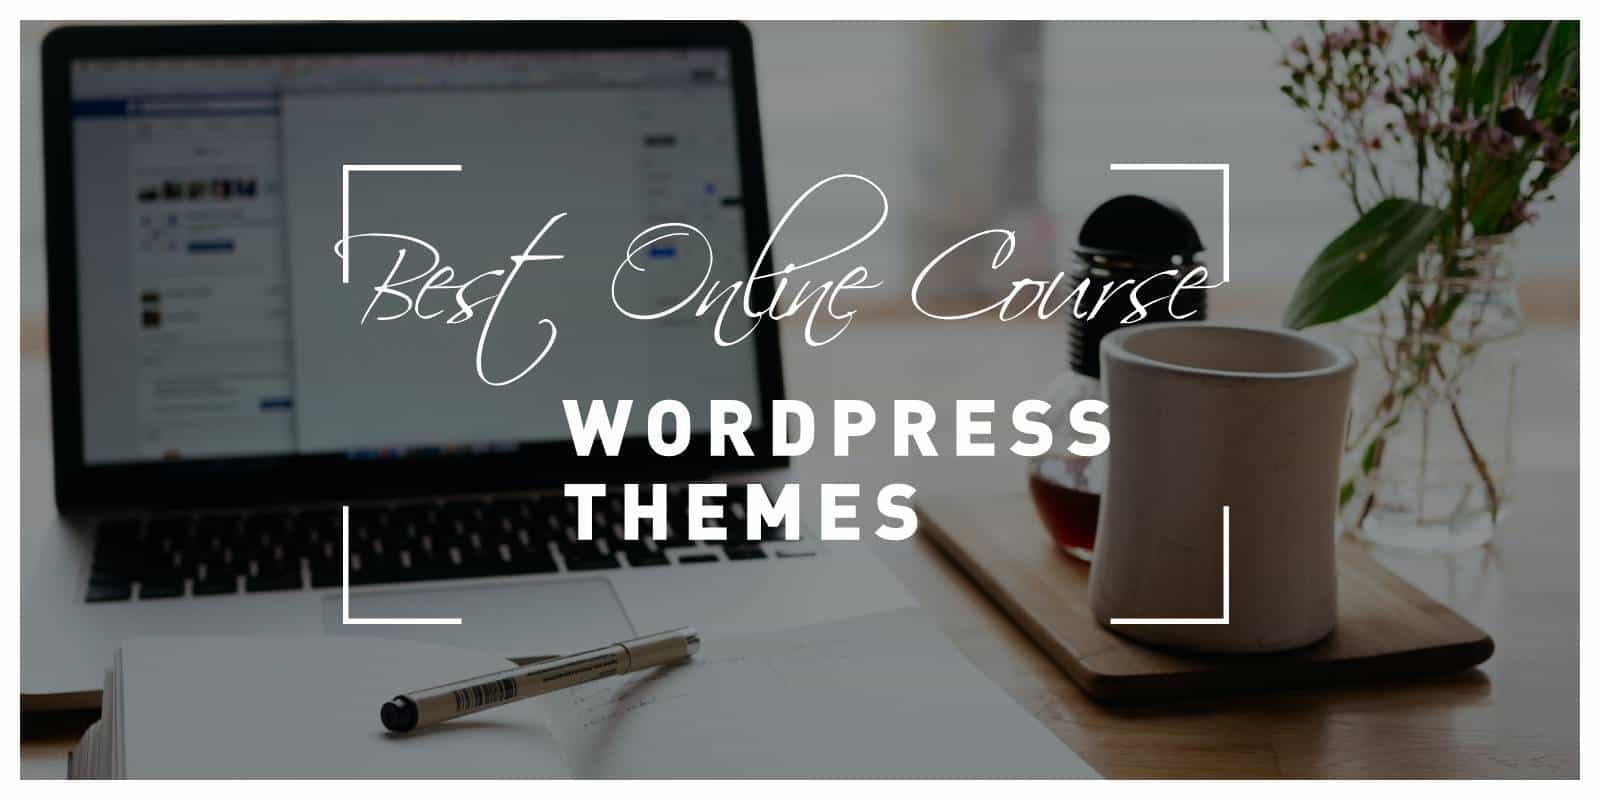 Best Online Course WordPress Themes You Can Customize and Integrate With Your Learning Management System